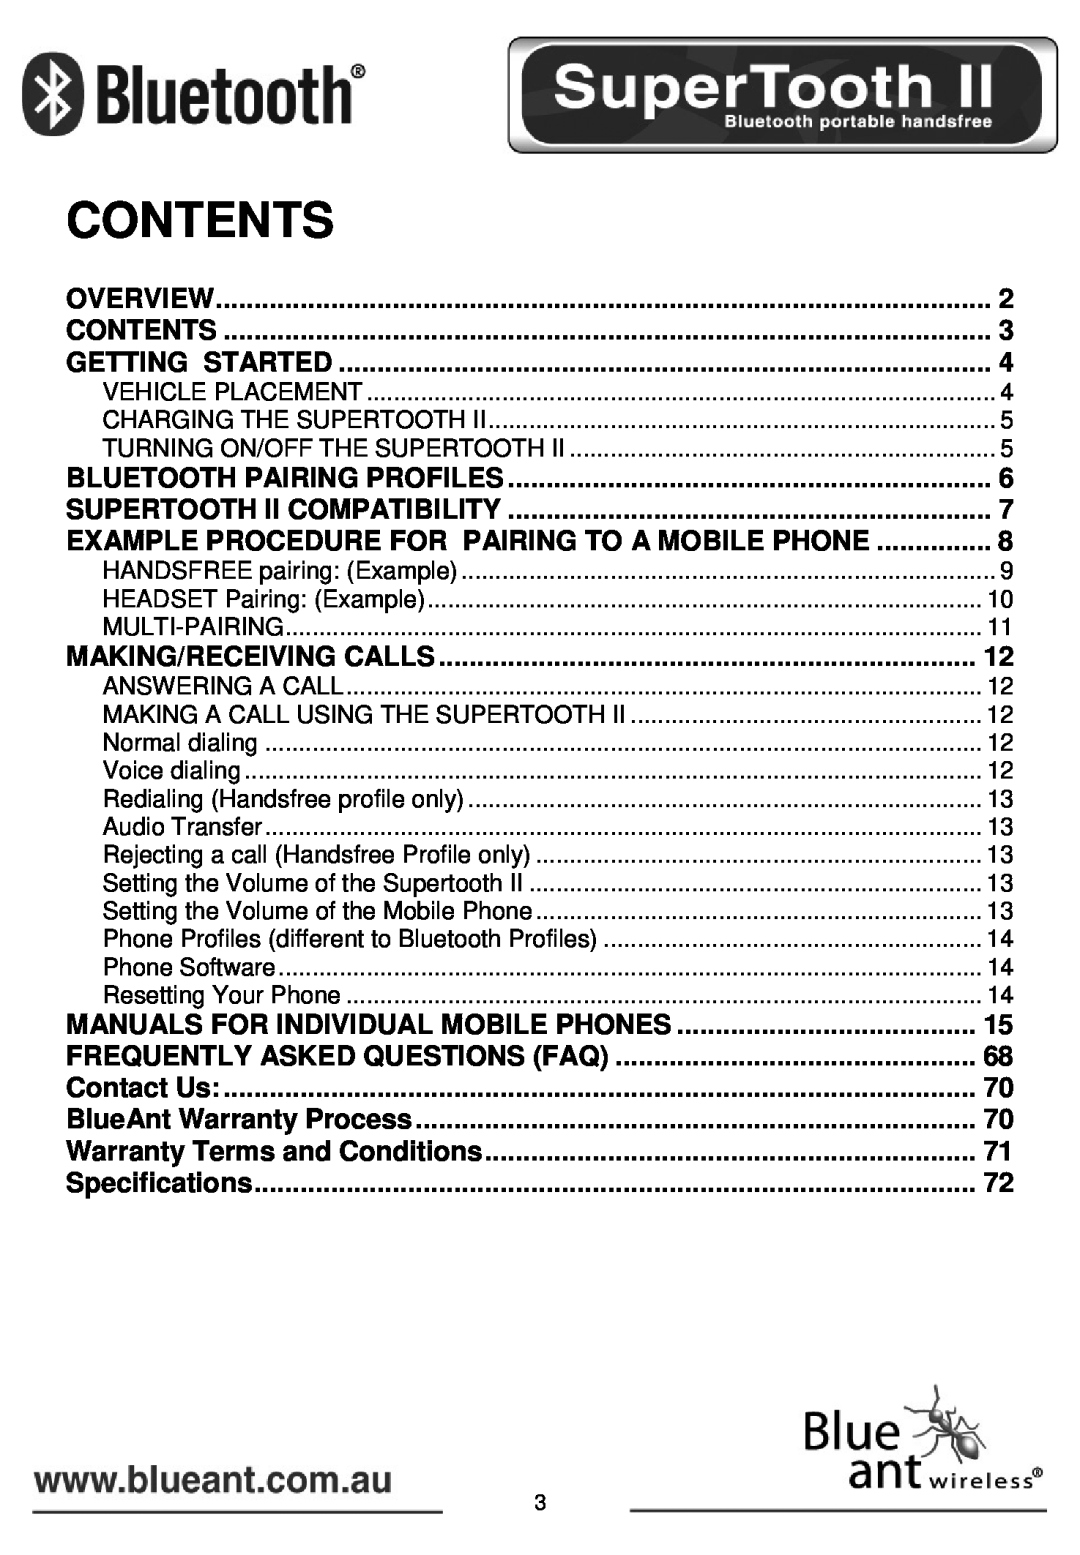 BlueAnt Wireless SUPERTOOTH II manual Contents 